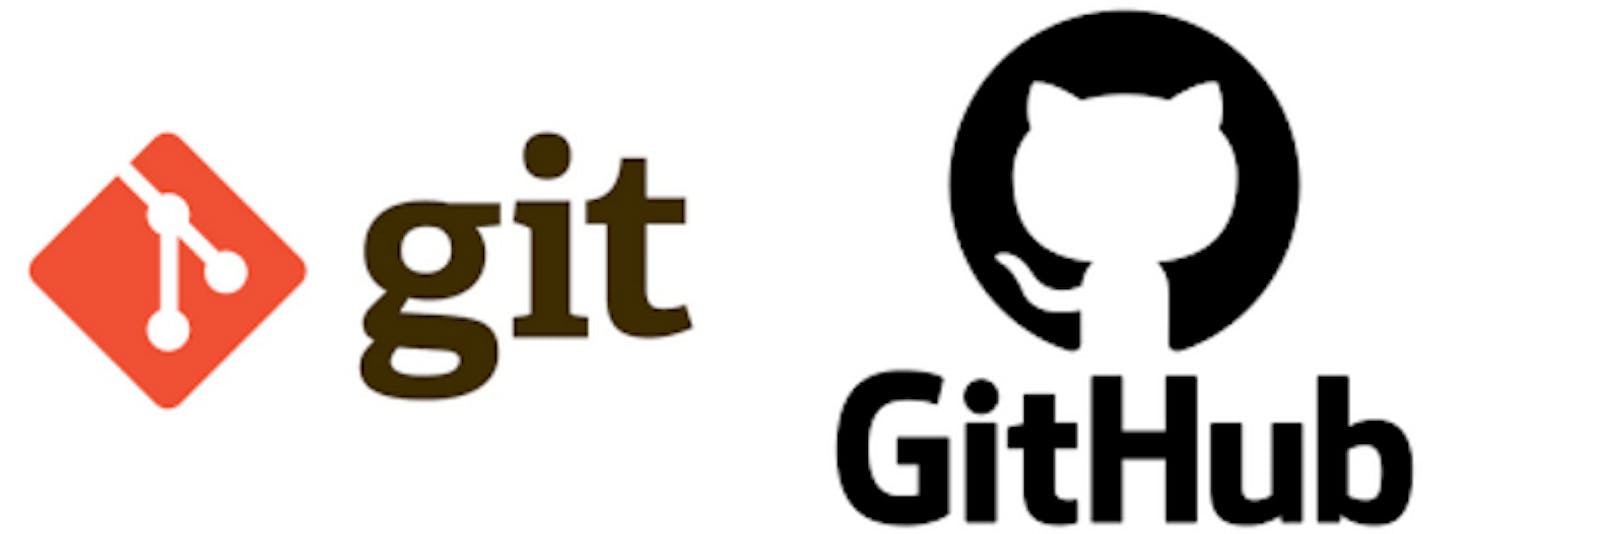 Mastering Git Essentials: 18 Commands Every Developer Should Know